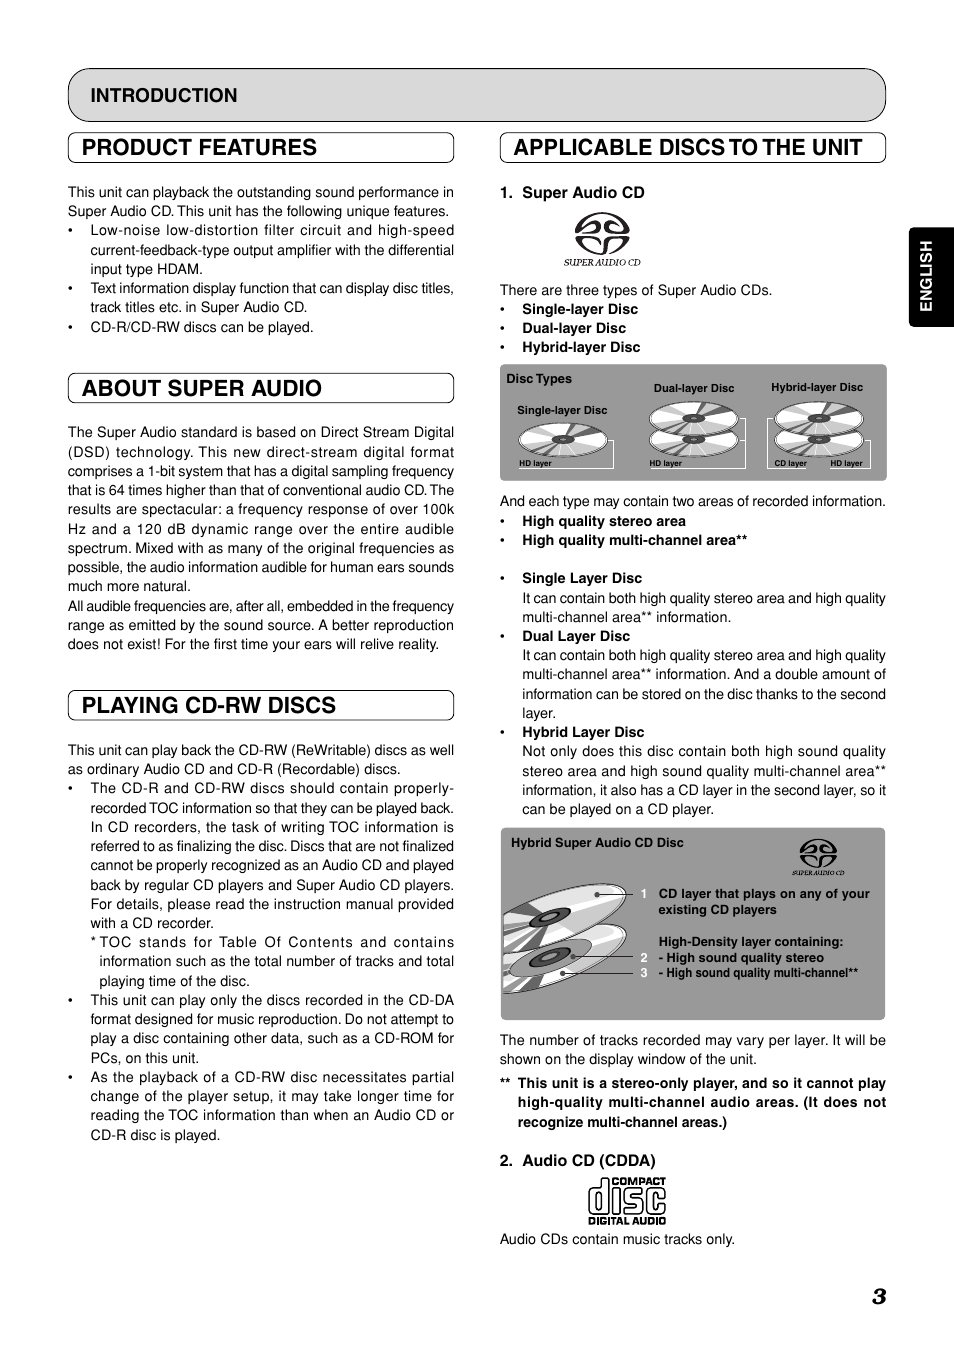 3applicable discs to the unit, Product features, About super audio | Playing cd-rw discs, Introduction | Marantz SA-11S1 User Manual | Page 8 / 29